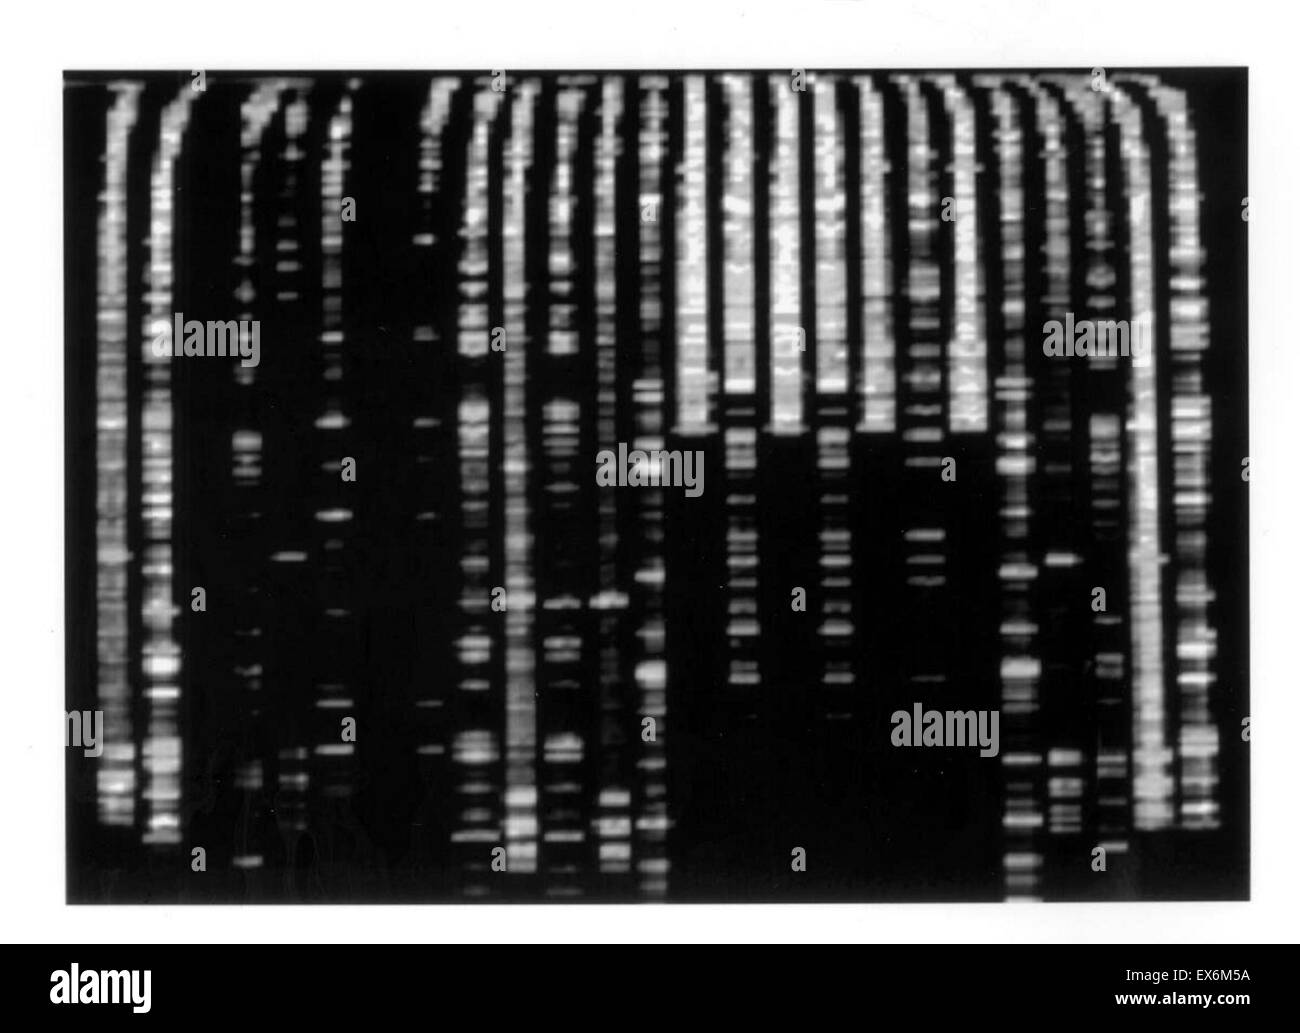 DNA chart, 1998 from the US Armed Forces Institute of Pathology Stock Photo